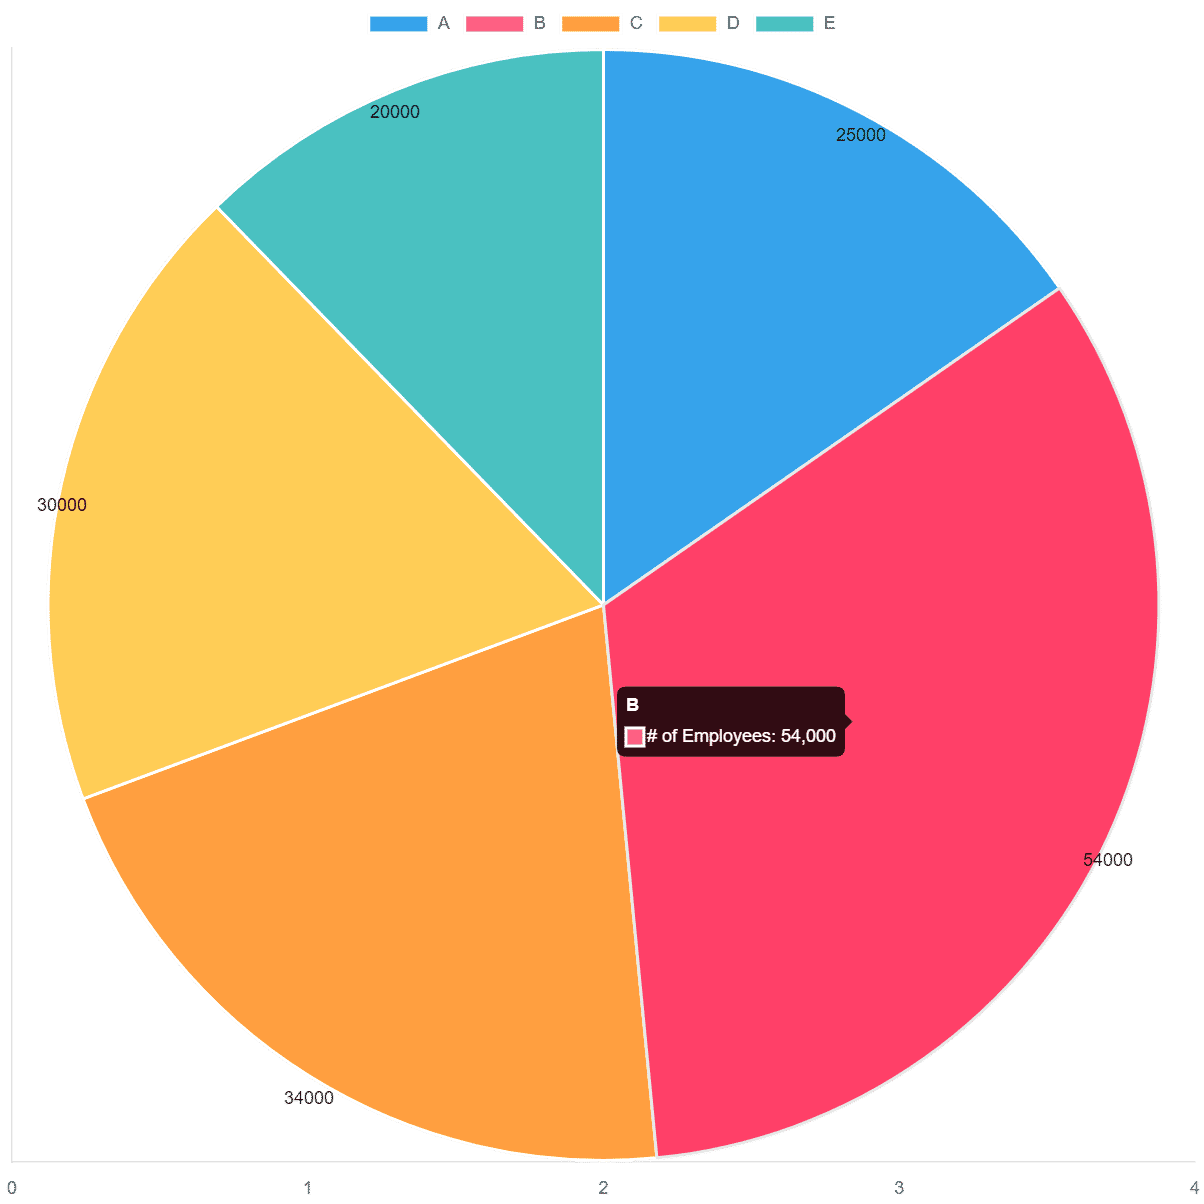 pie charts in chart.js